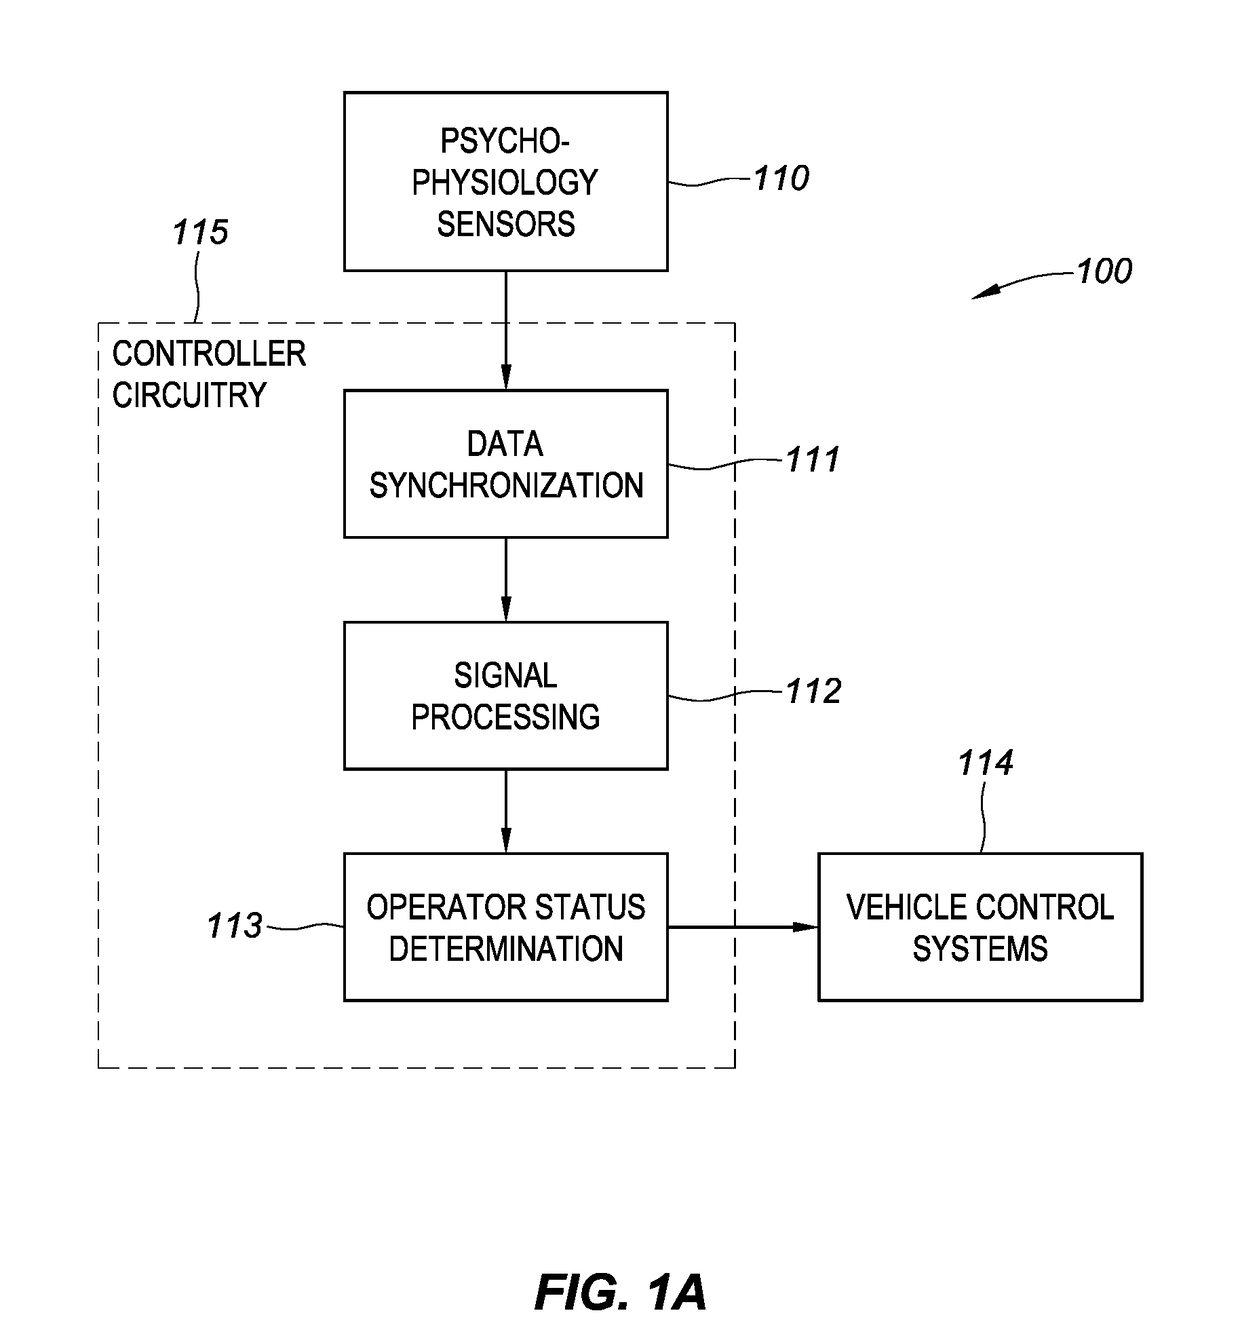 System and Method for Human Operator and Machine Integration